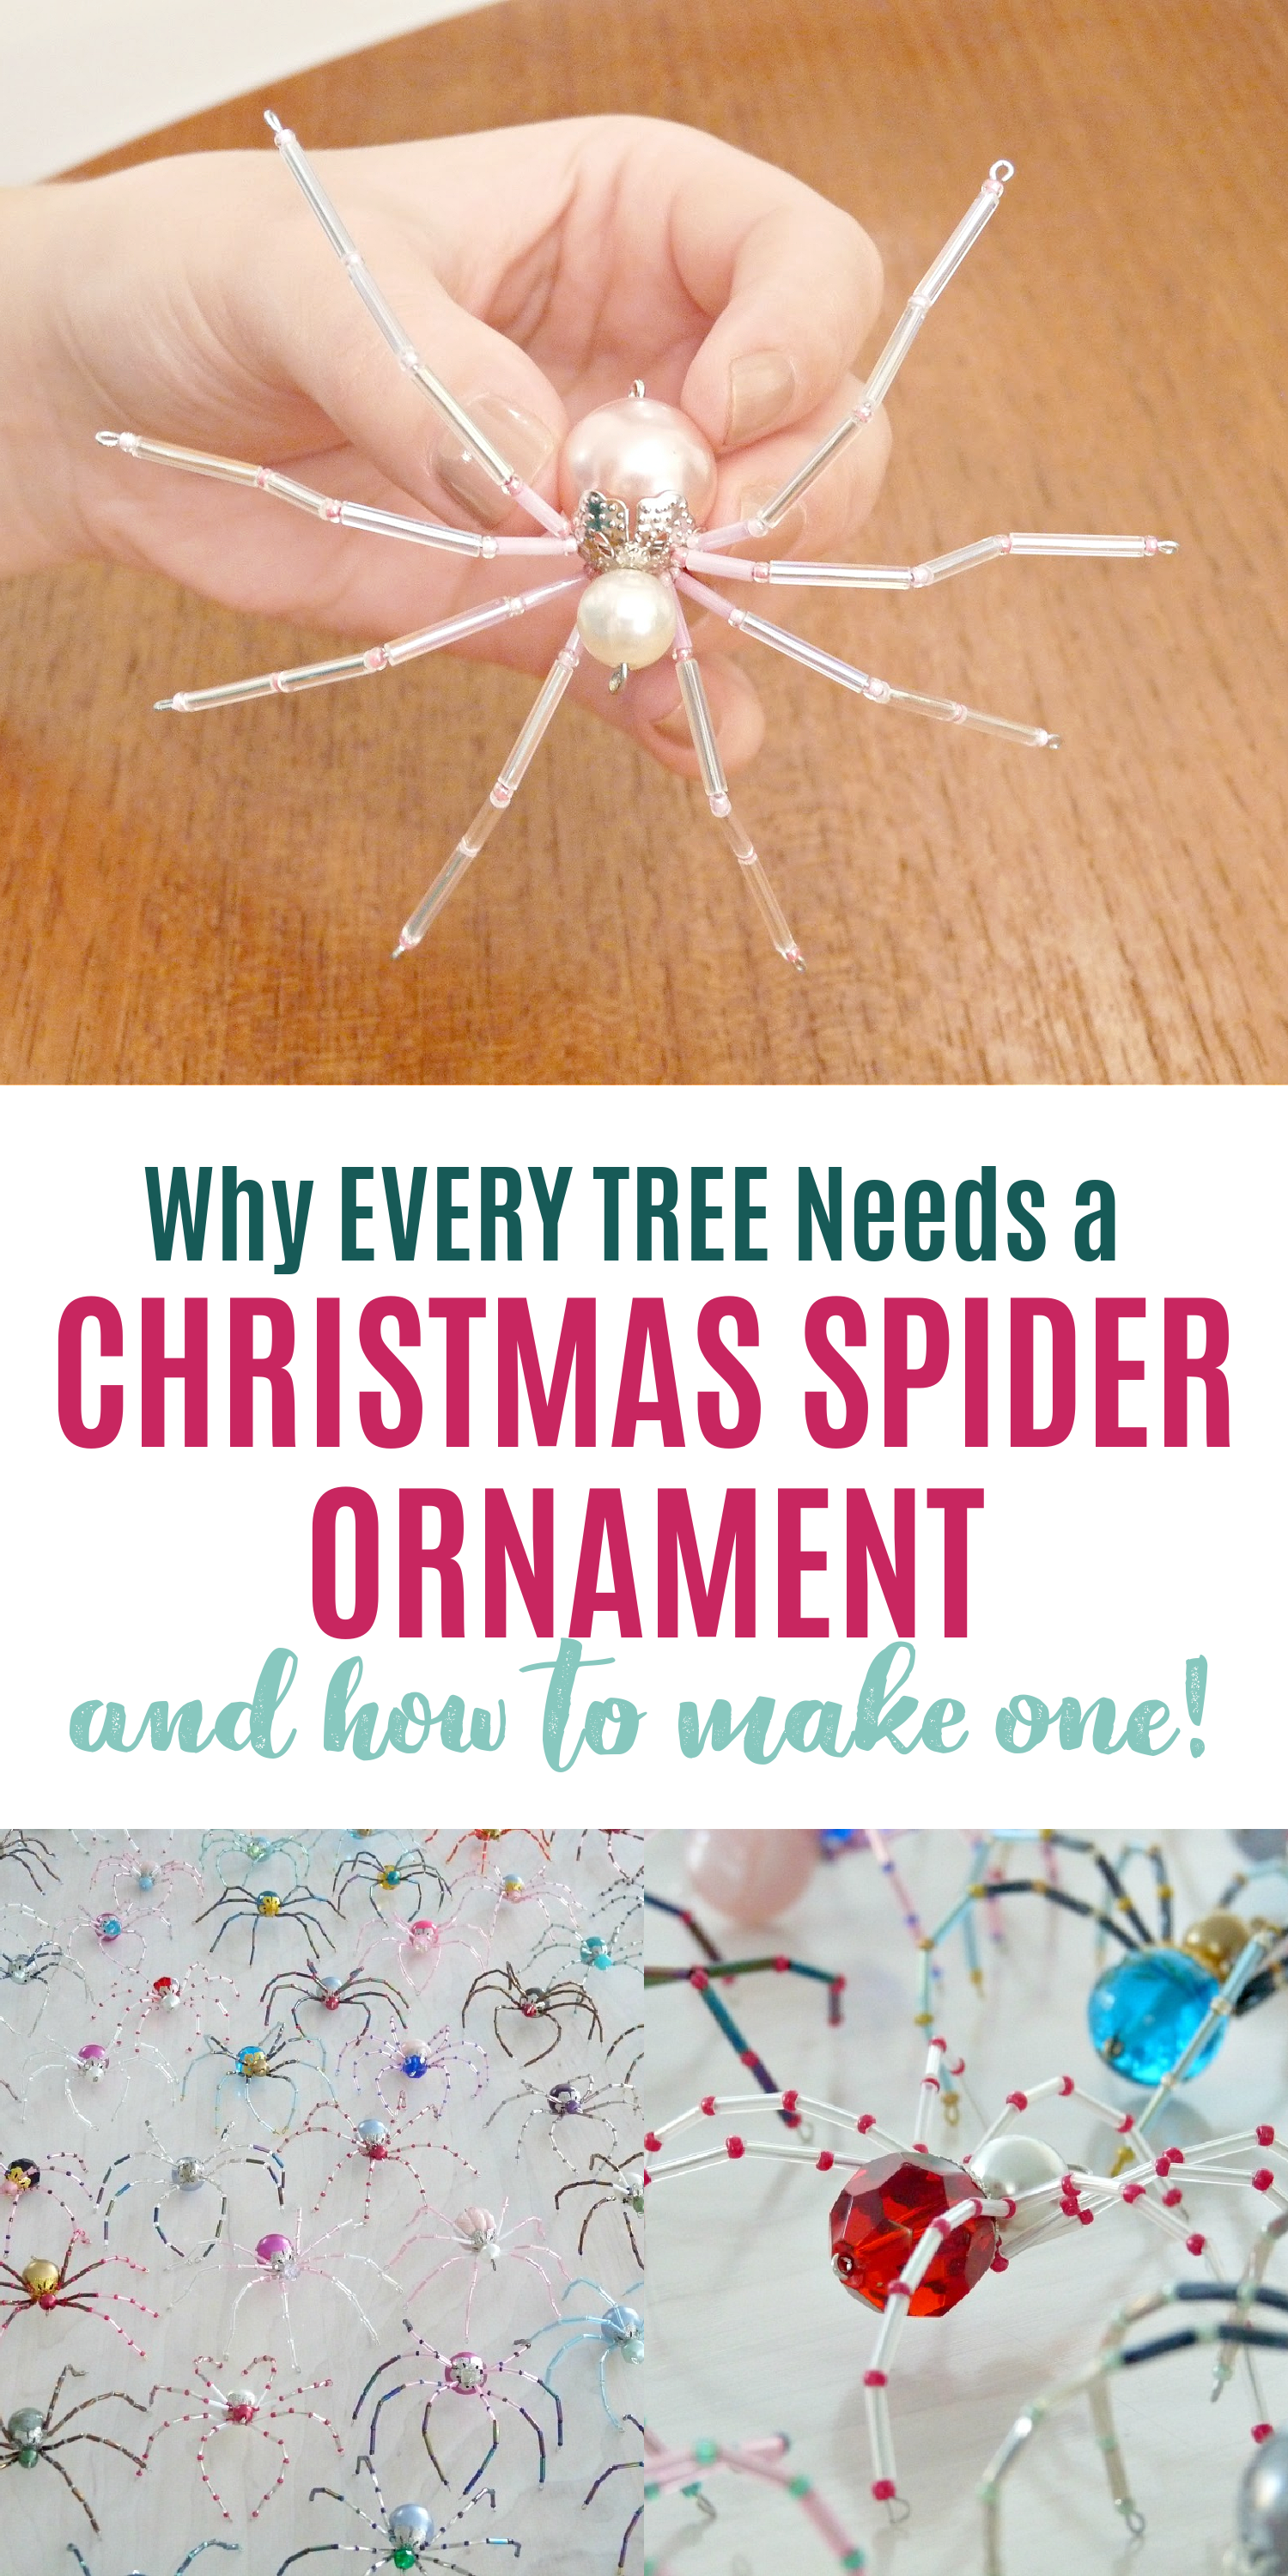 Why Every Tree Needs a Christmas Spider Ornament